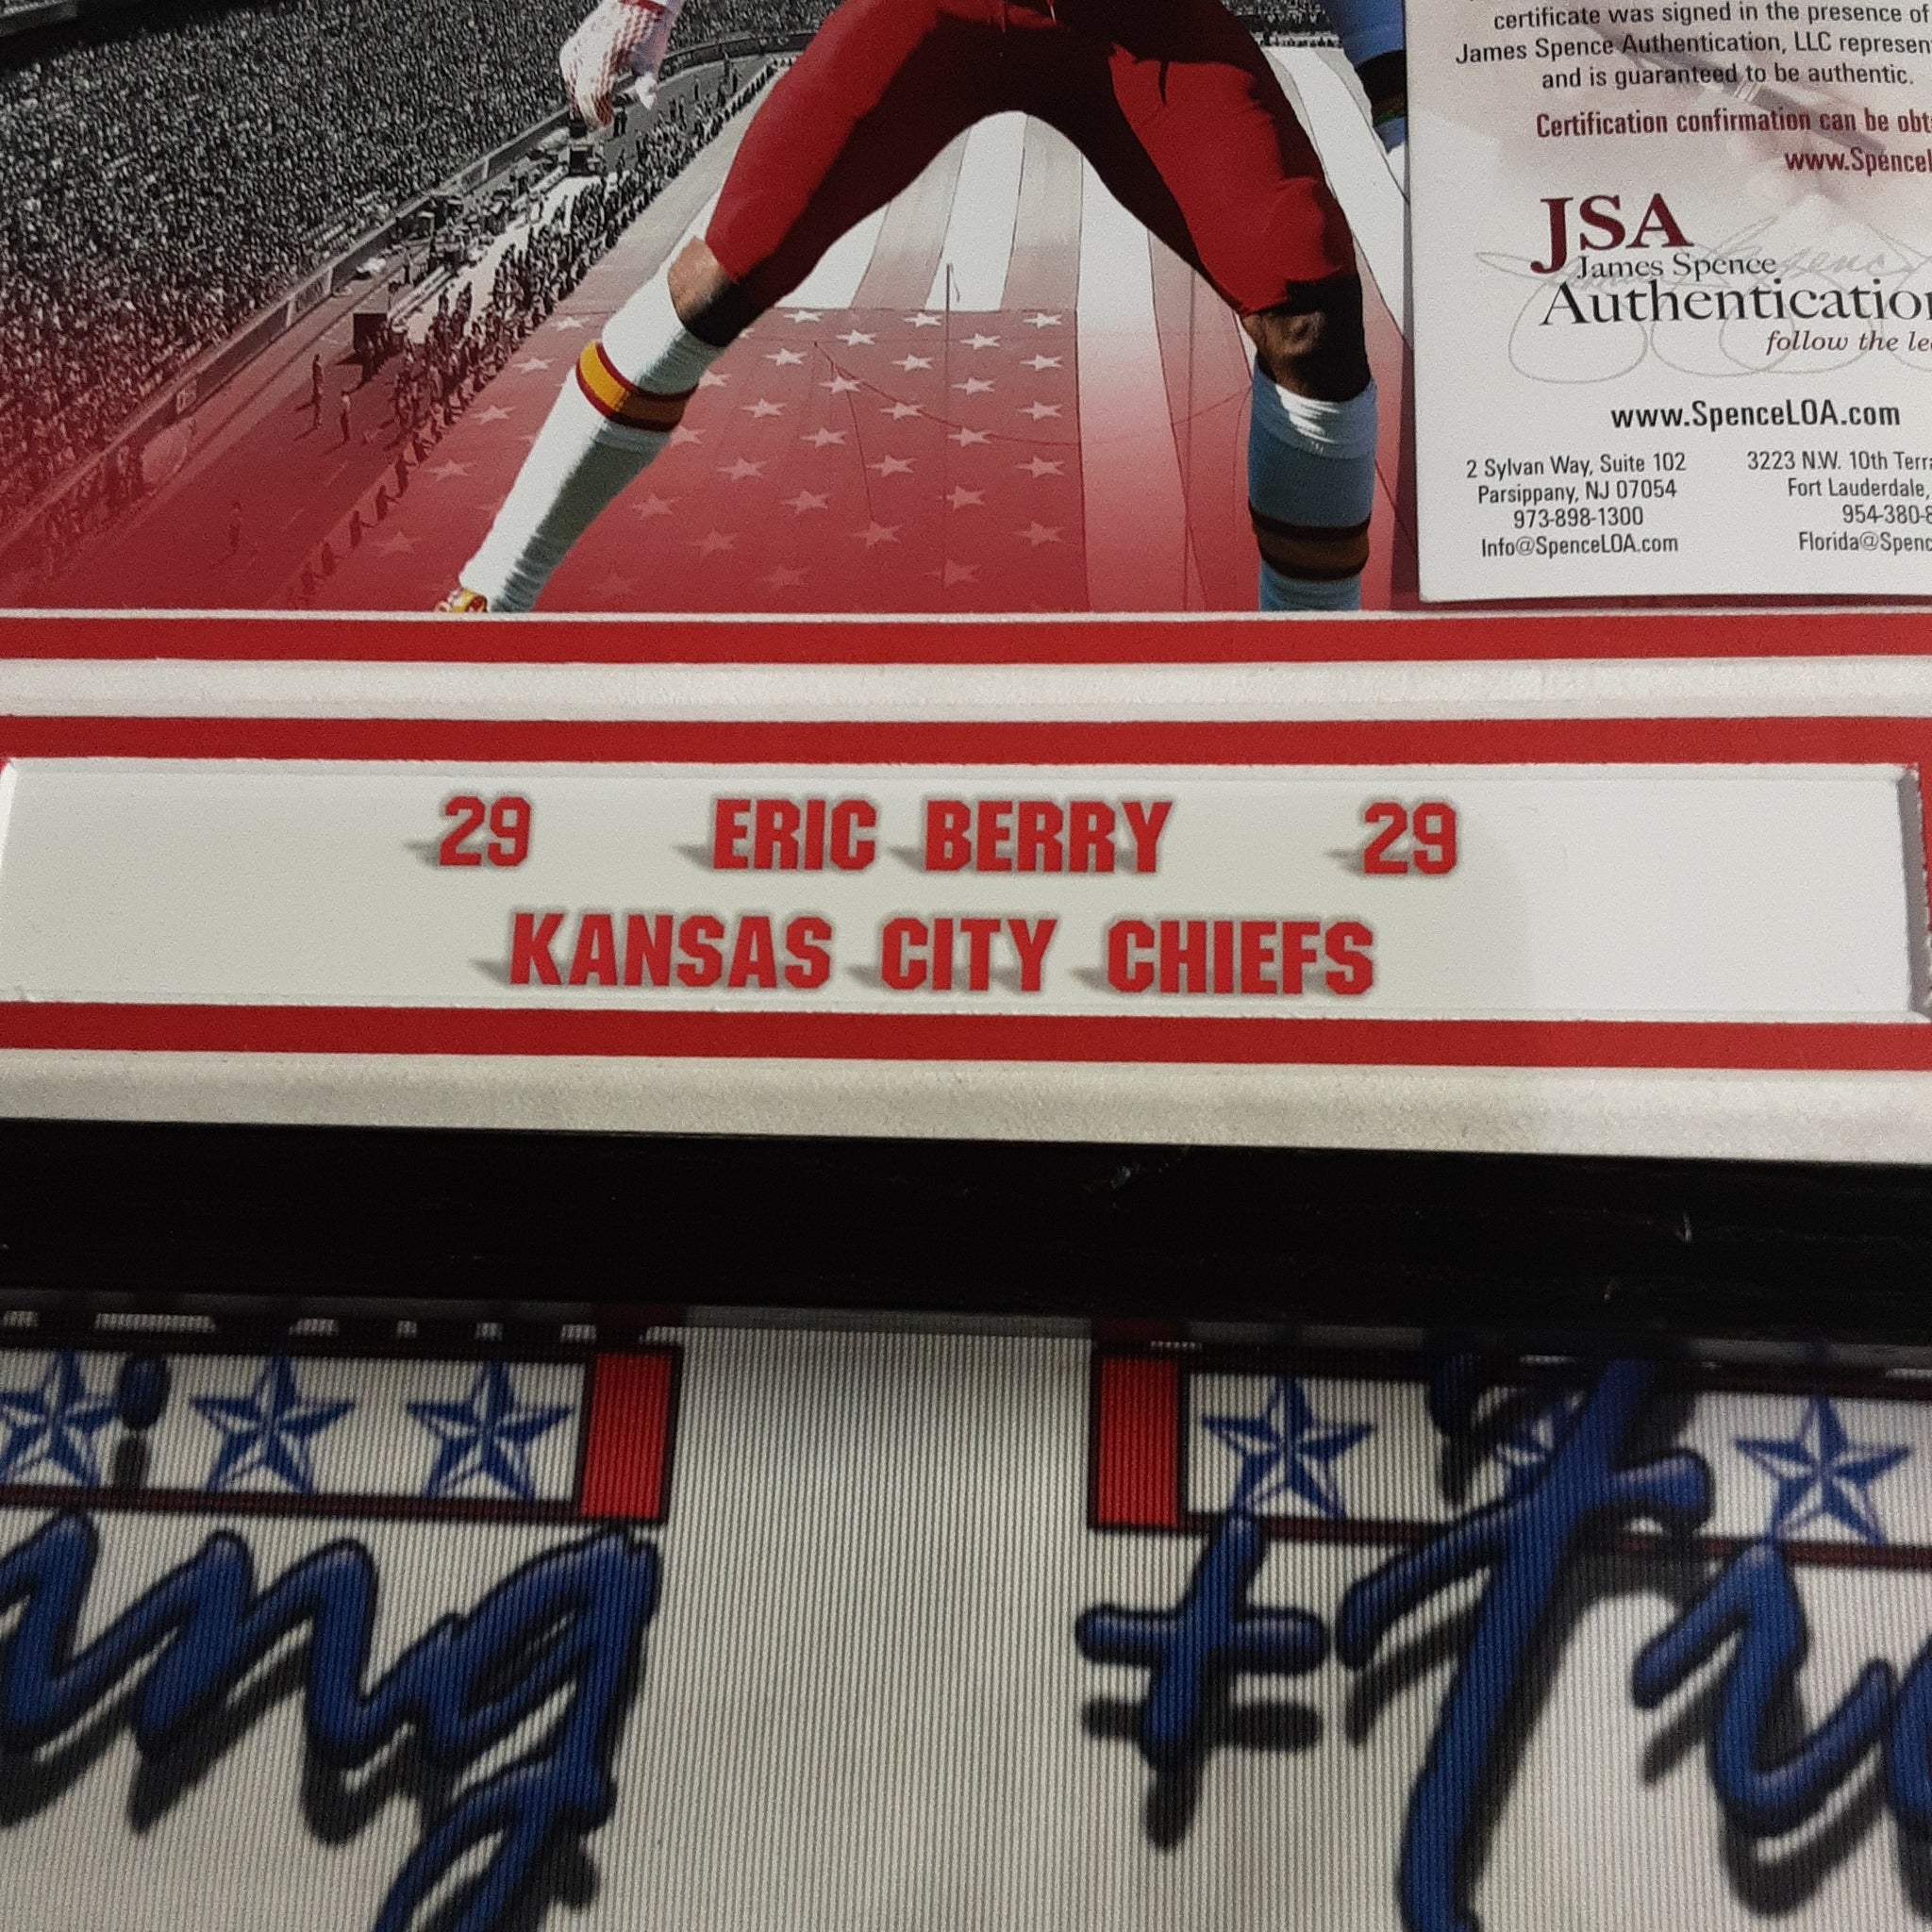 Eric Berry Authentic Signed Framed 11x14 Photo Autographed JSA